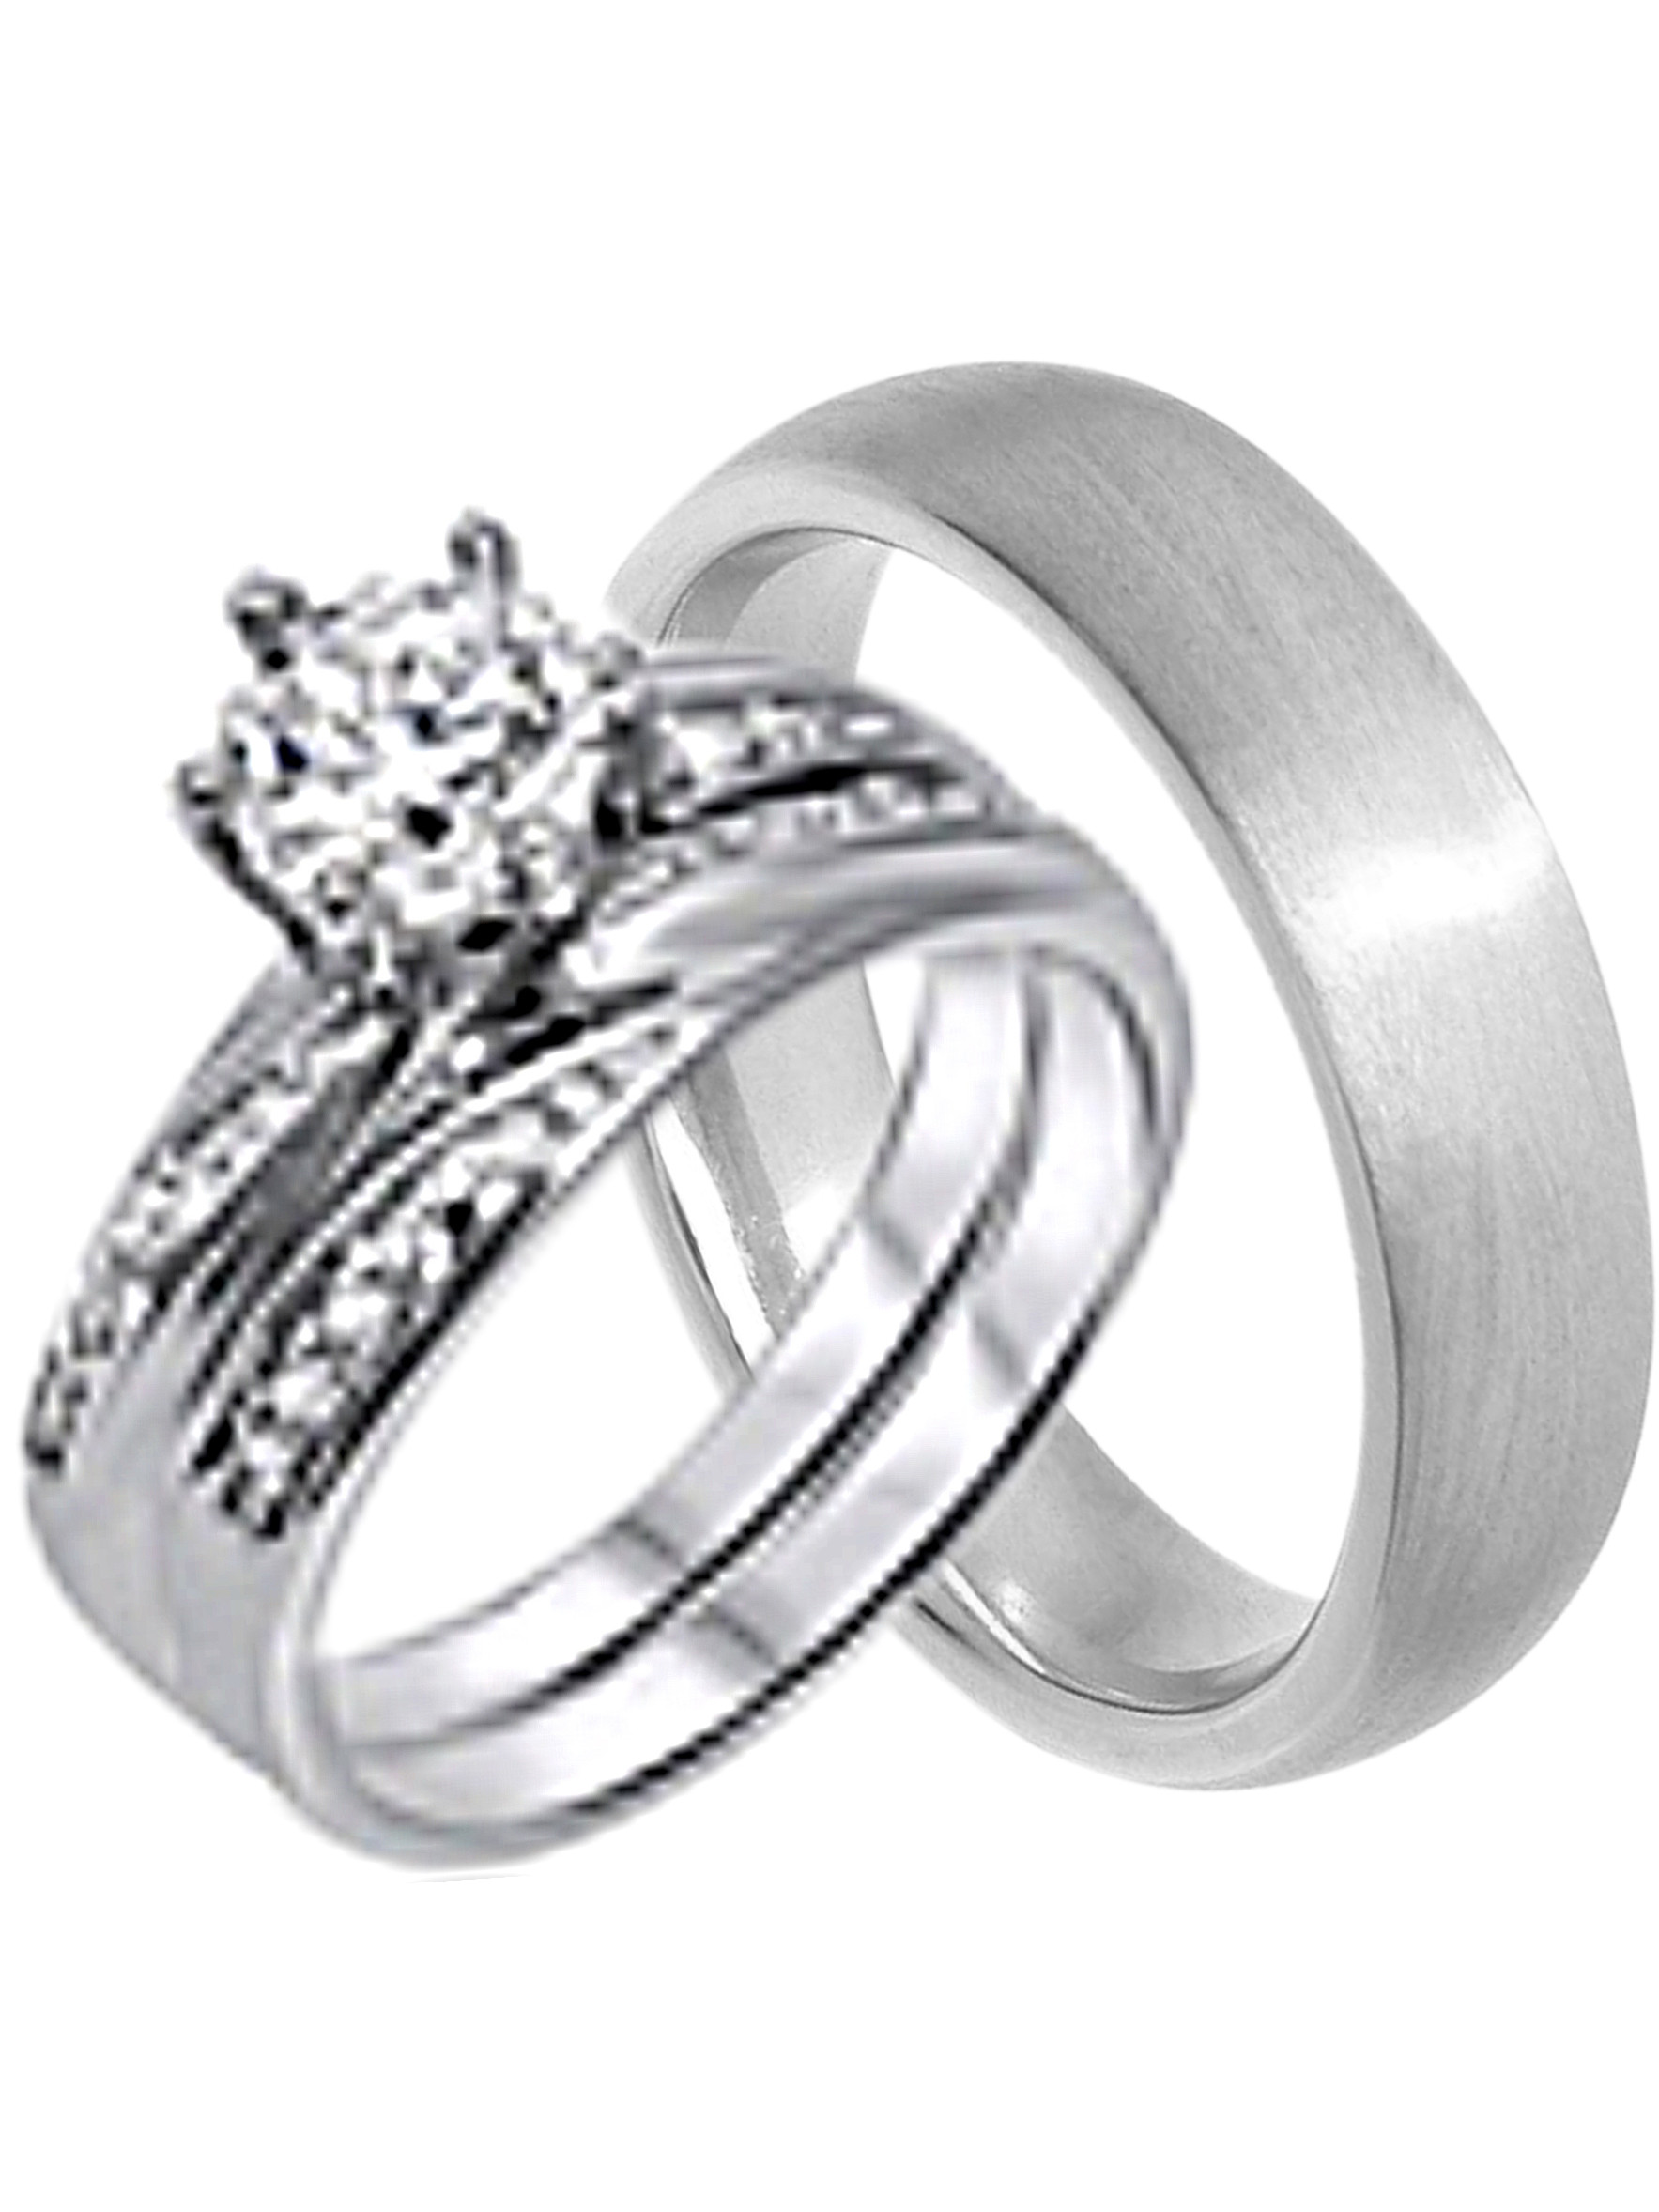 Cheap Wedding Ring Sets For Her
 His and Hers Wedding Ring Set Cheap Wedding Bands for Him